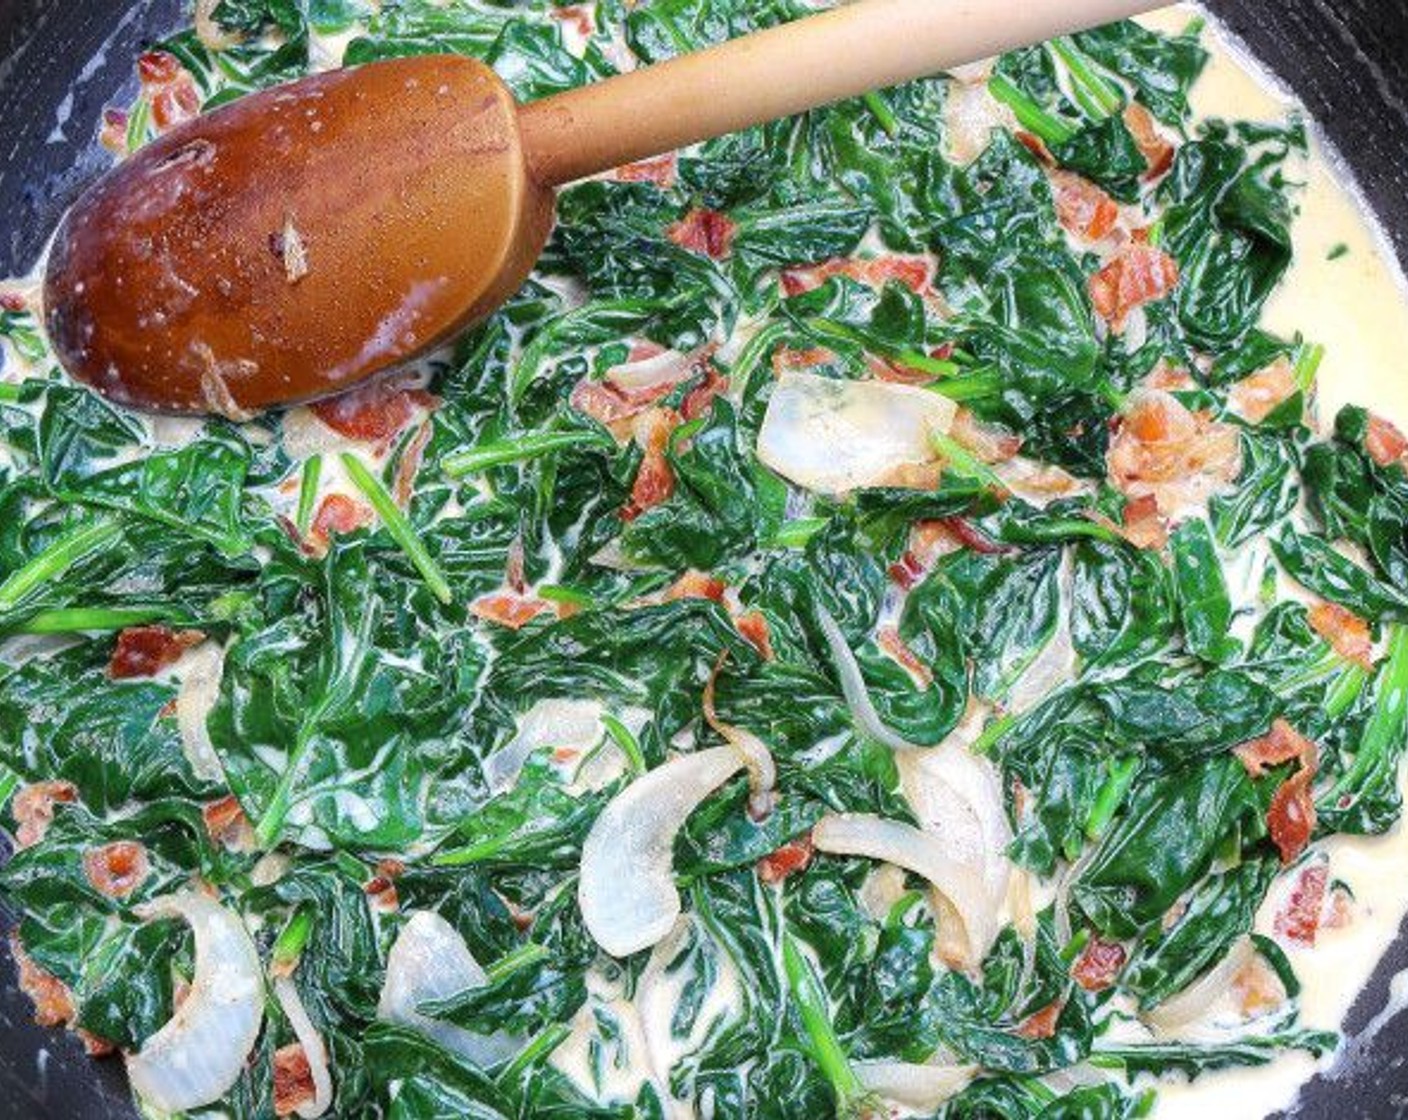 step 7 Then add additional Spinach Leaves (7 1/2 cups) and Heavy Cream (1/3 cup), simmer 1 minute, remove from heat.